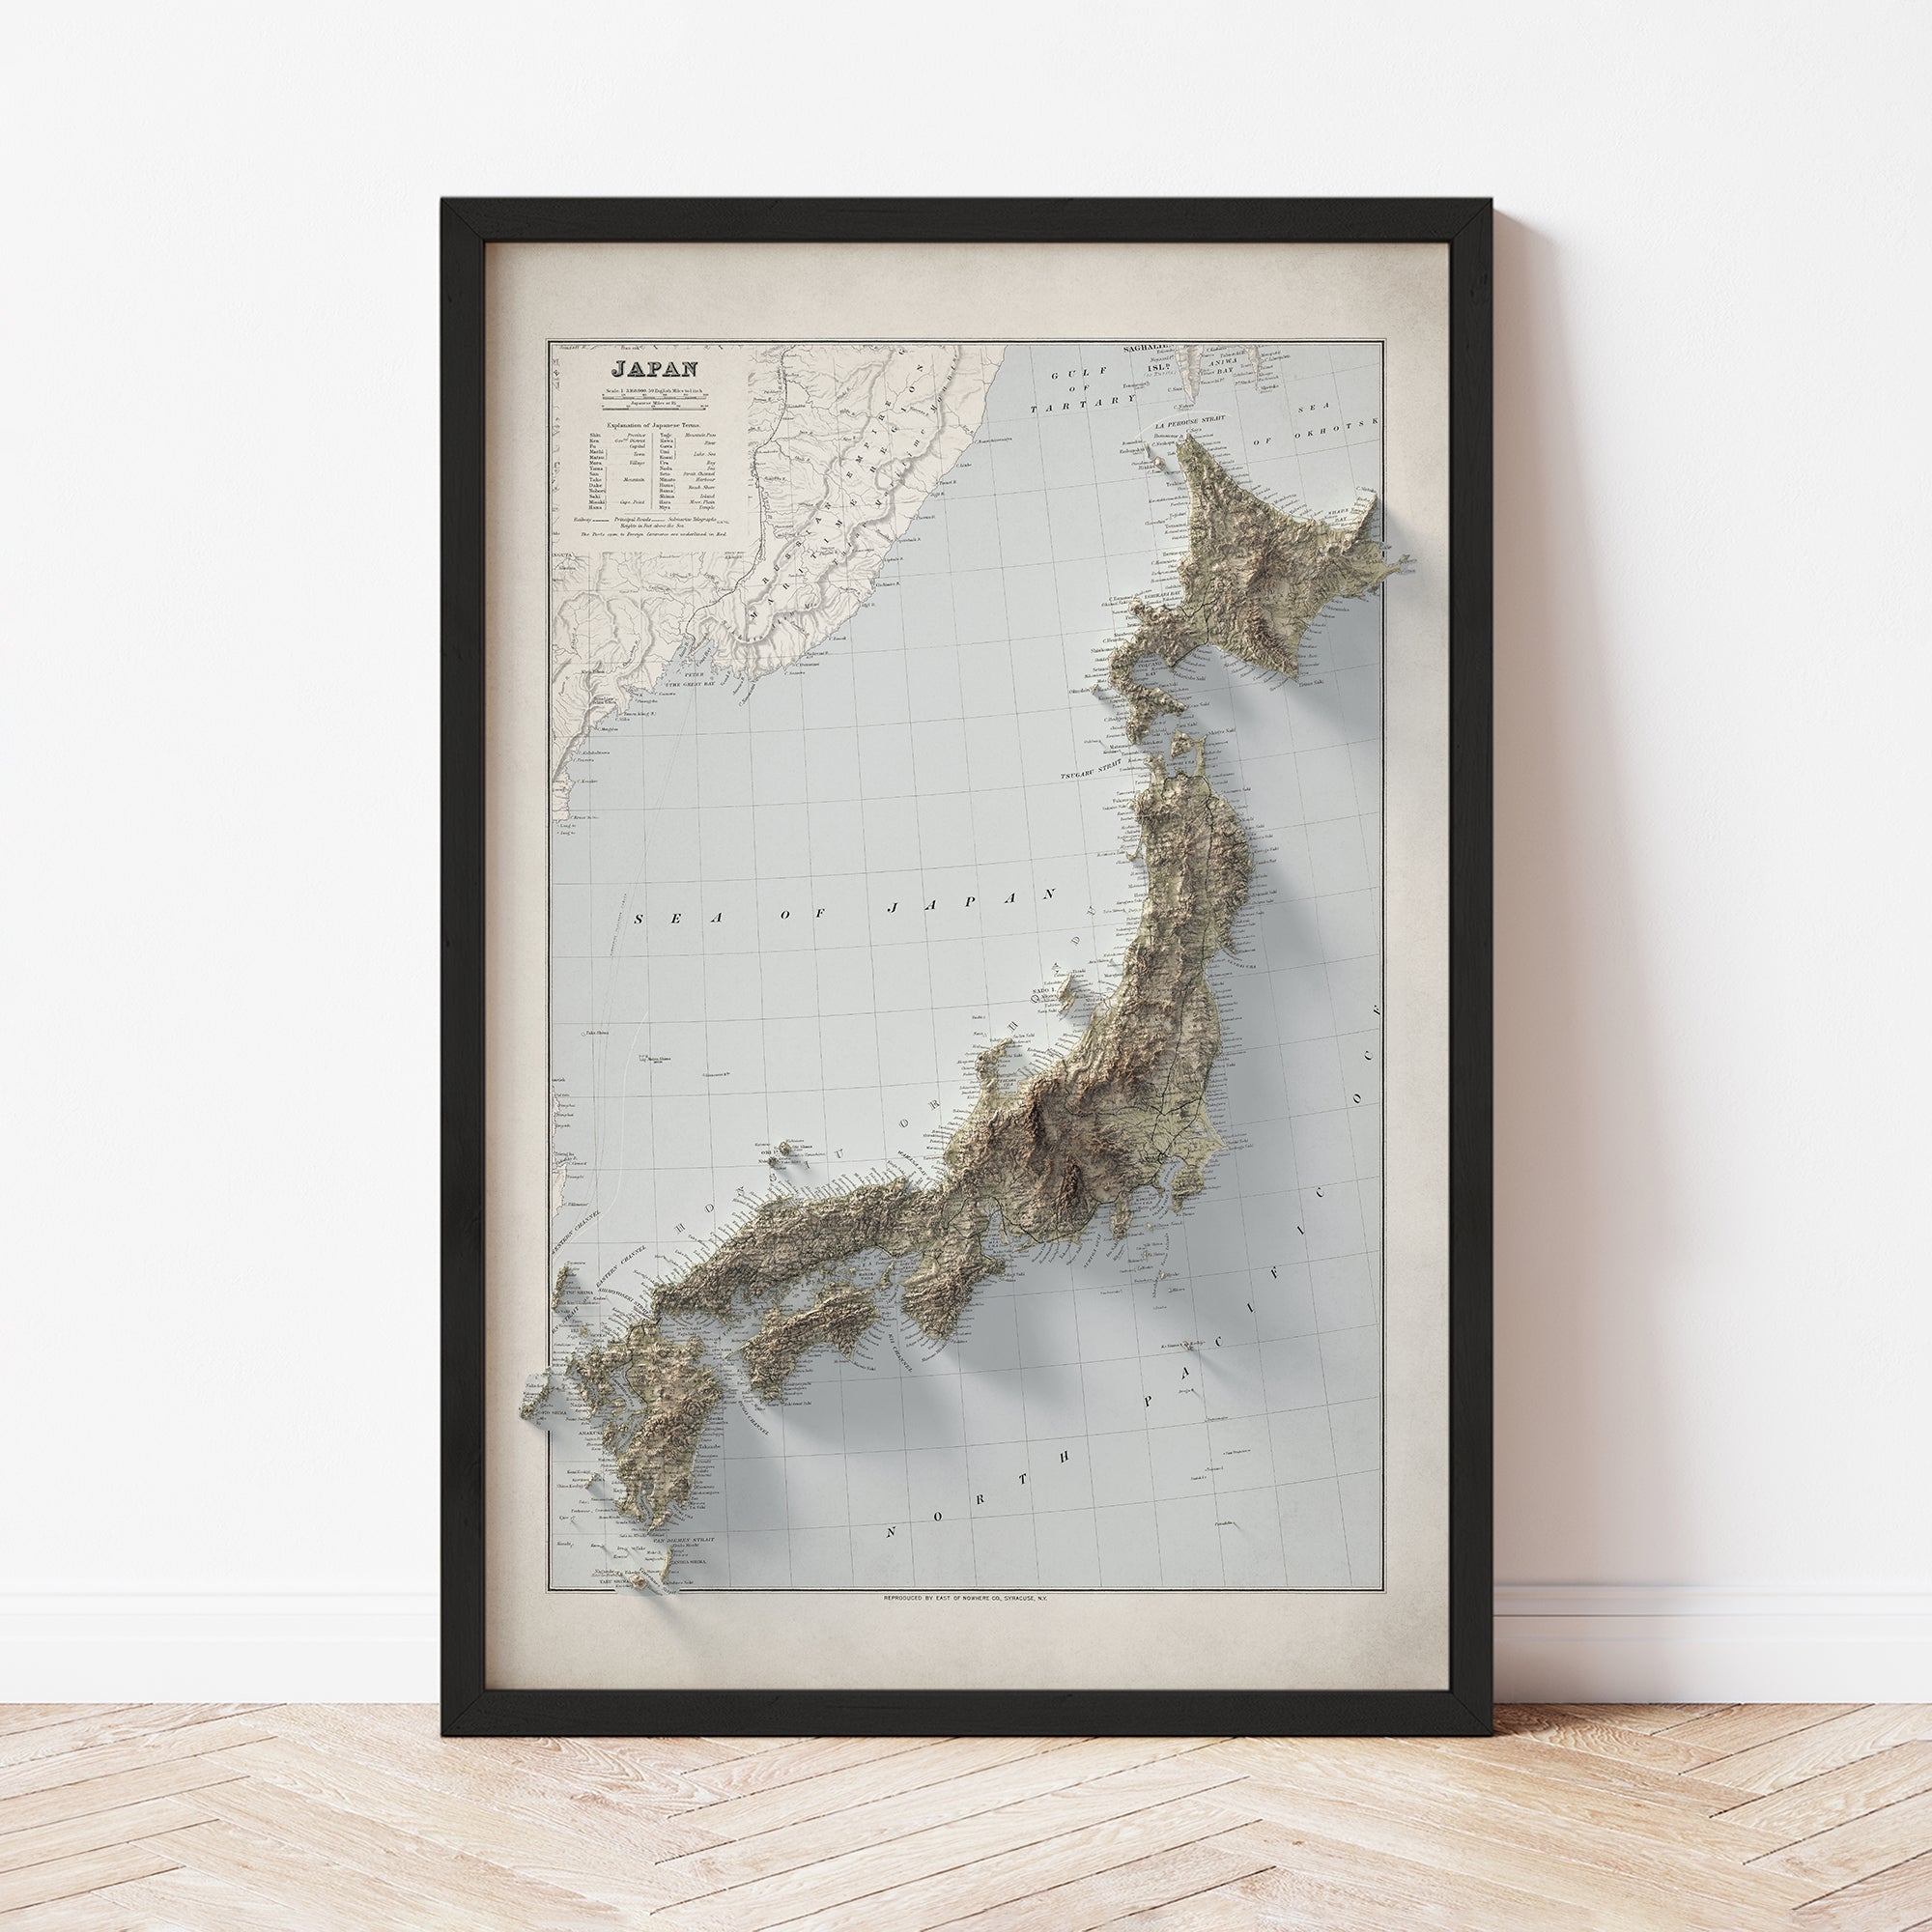 Japan - Vintage Shaded Relief Map (1901)